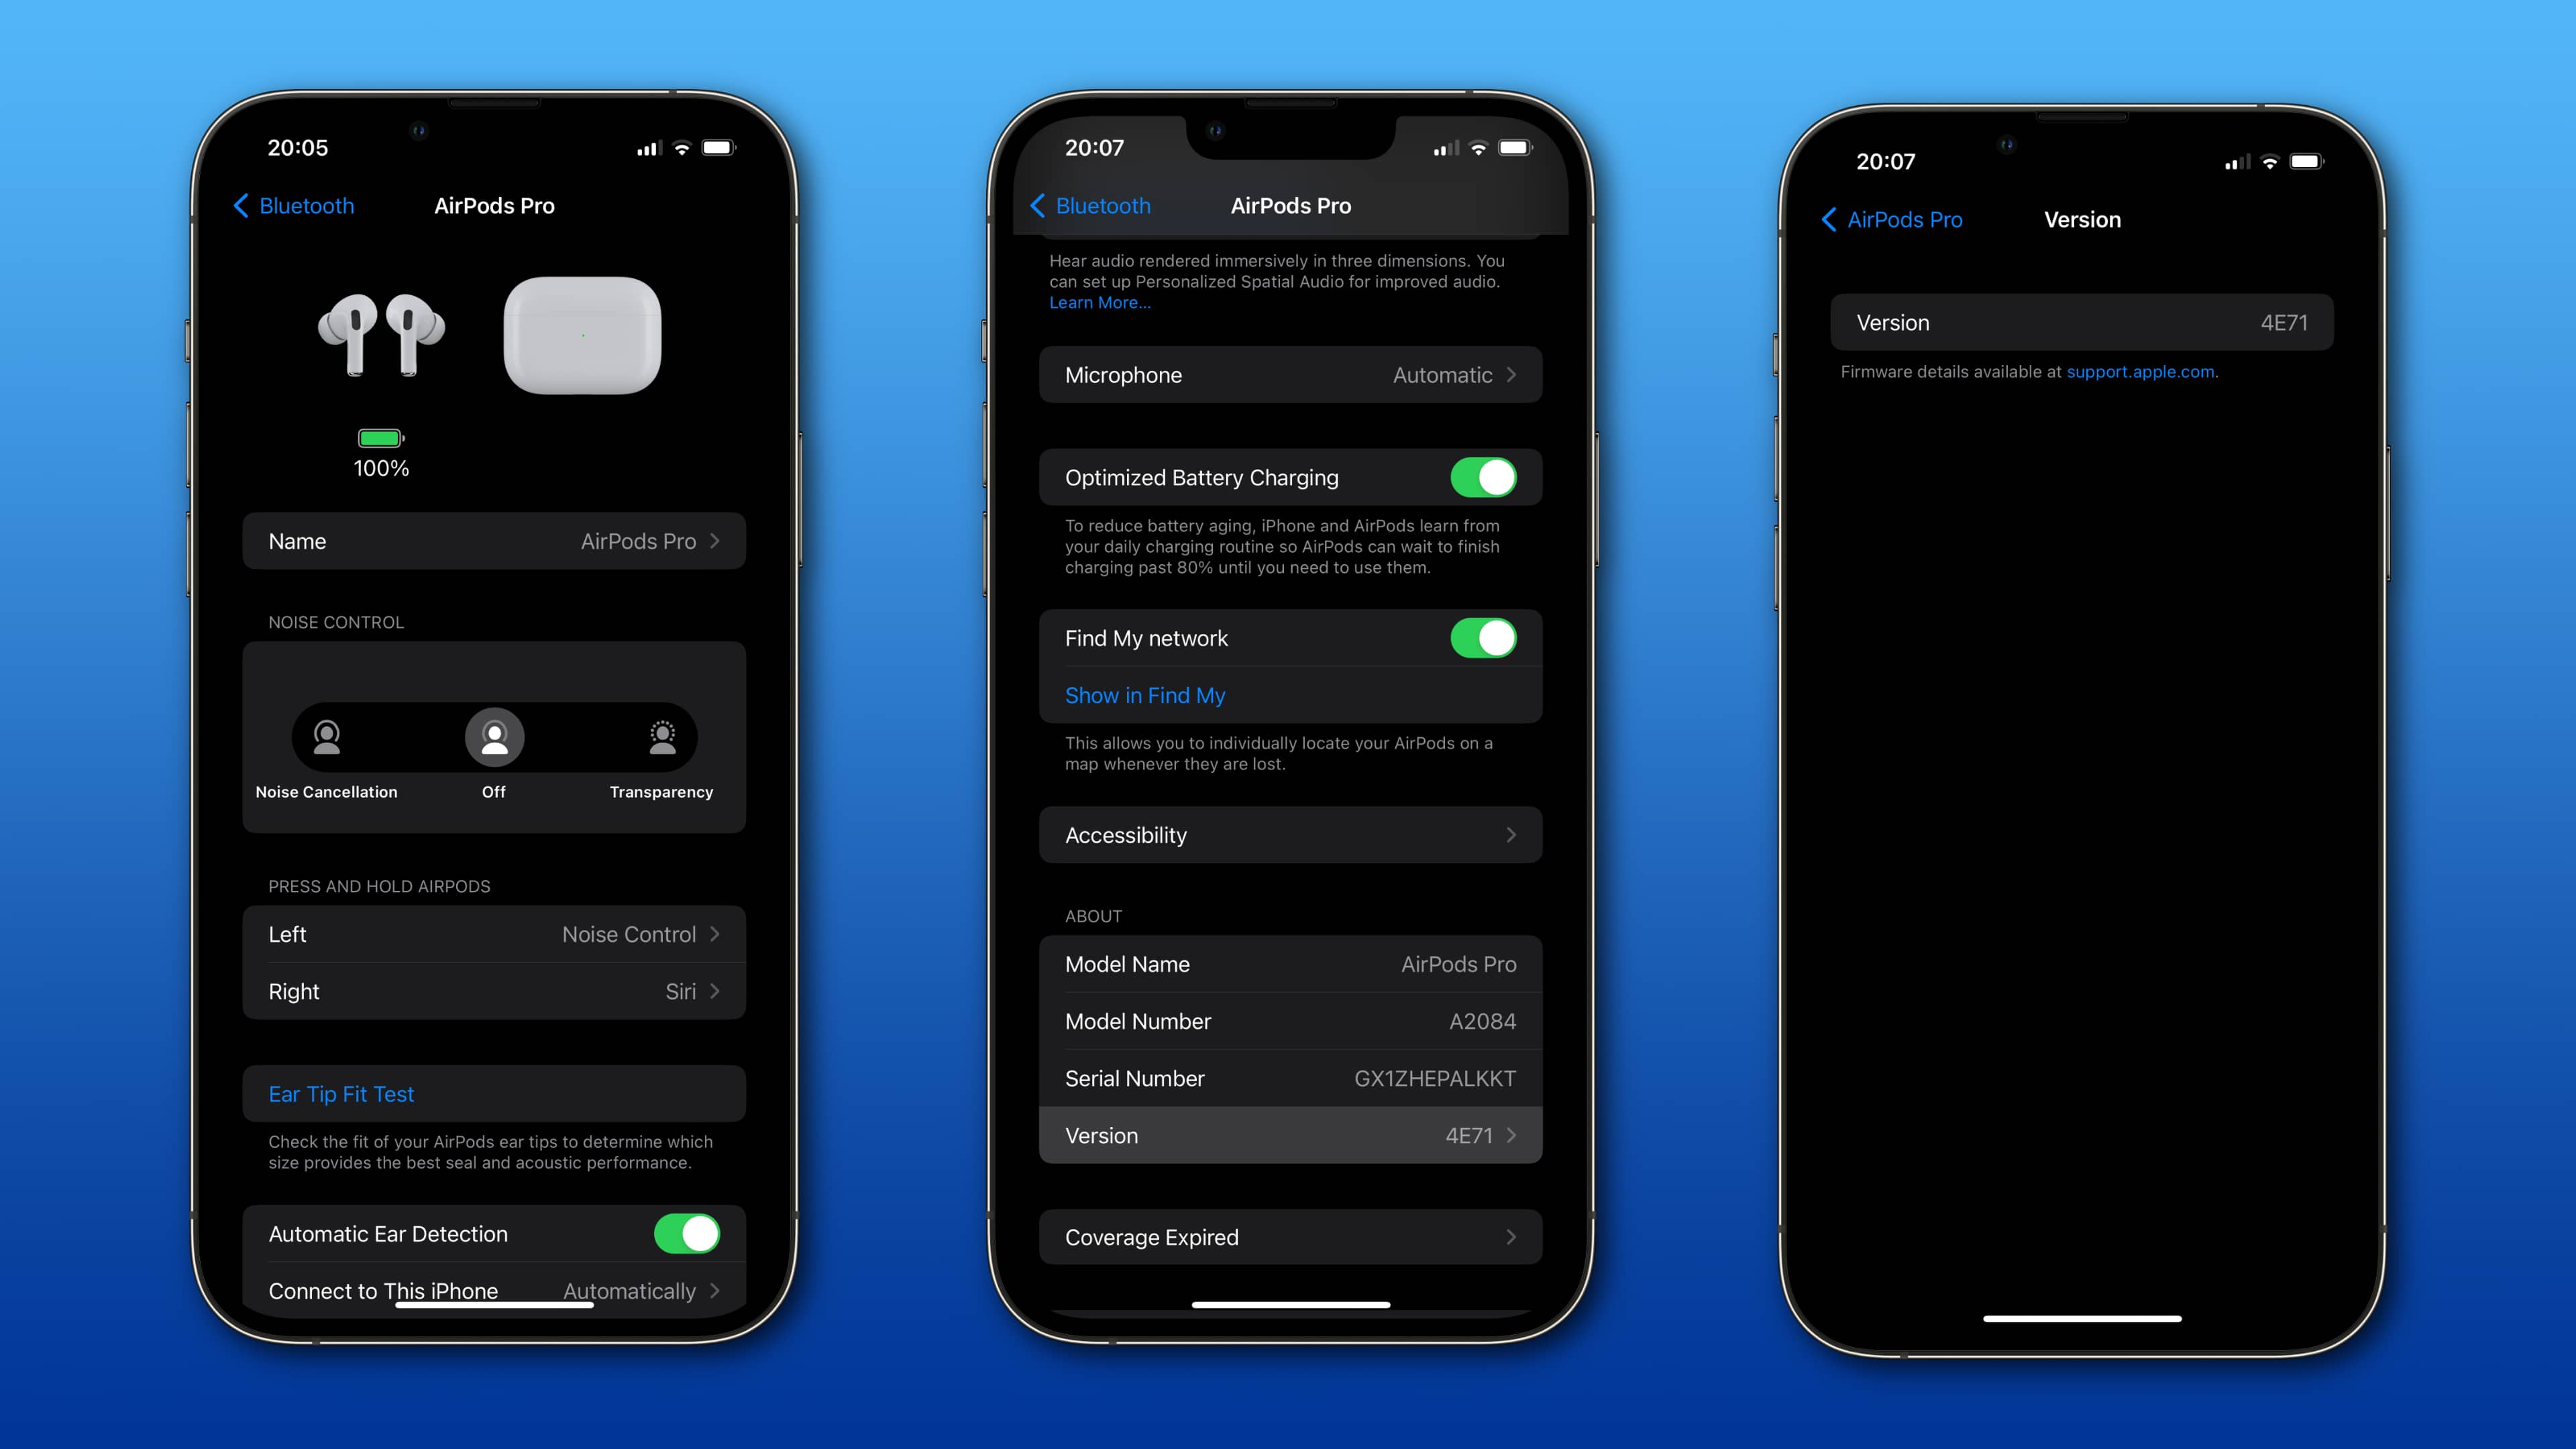 Three iPhone screenshots showing AirPods settings in iOS 16 with firmware version number and a link to release notes on the web